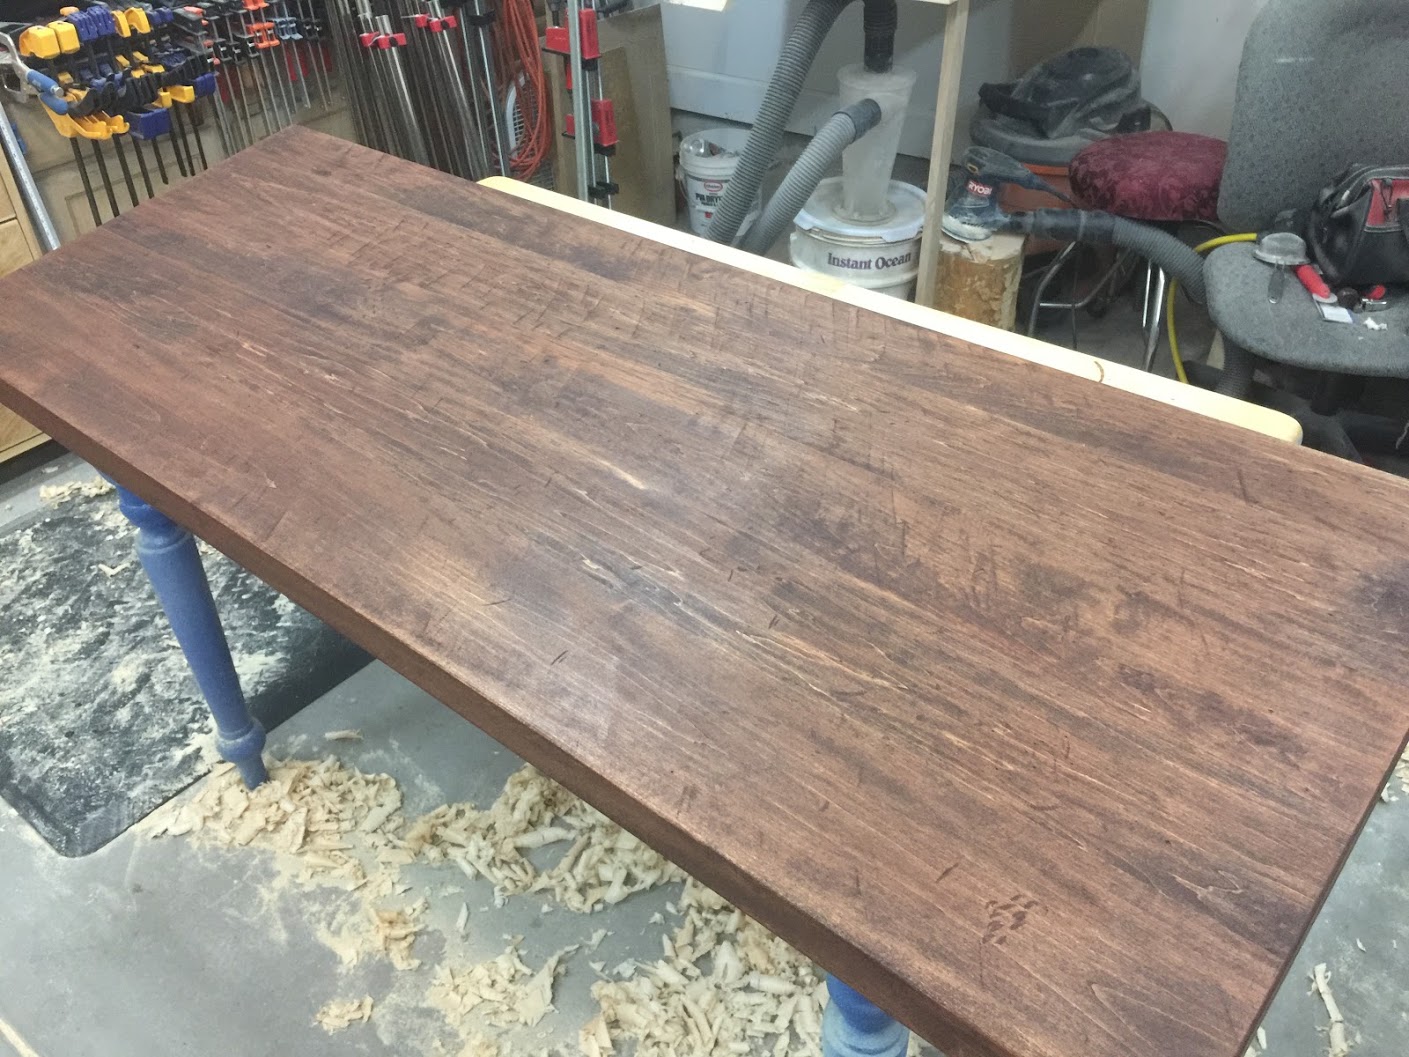 Counter top stained with English Chestnut (MINWAX 233)